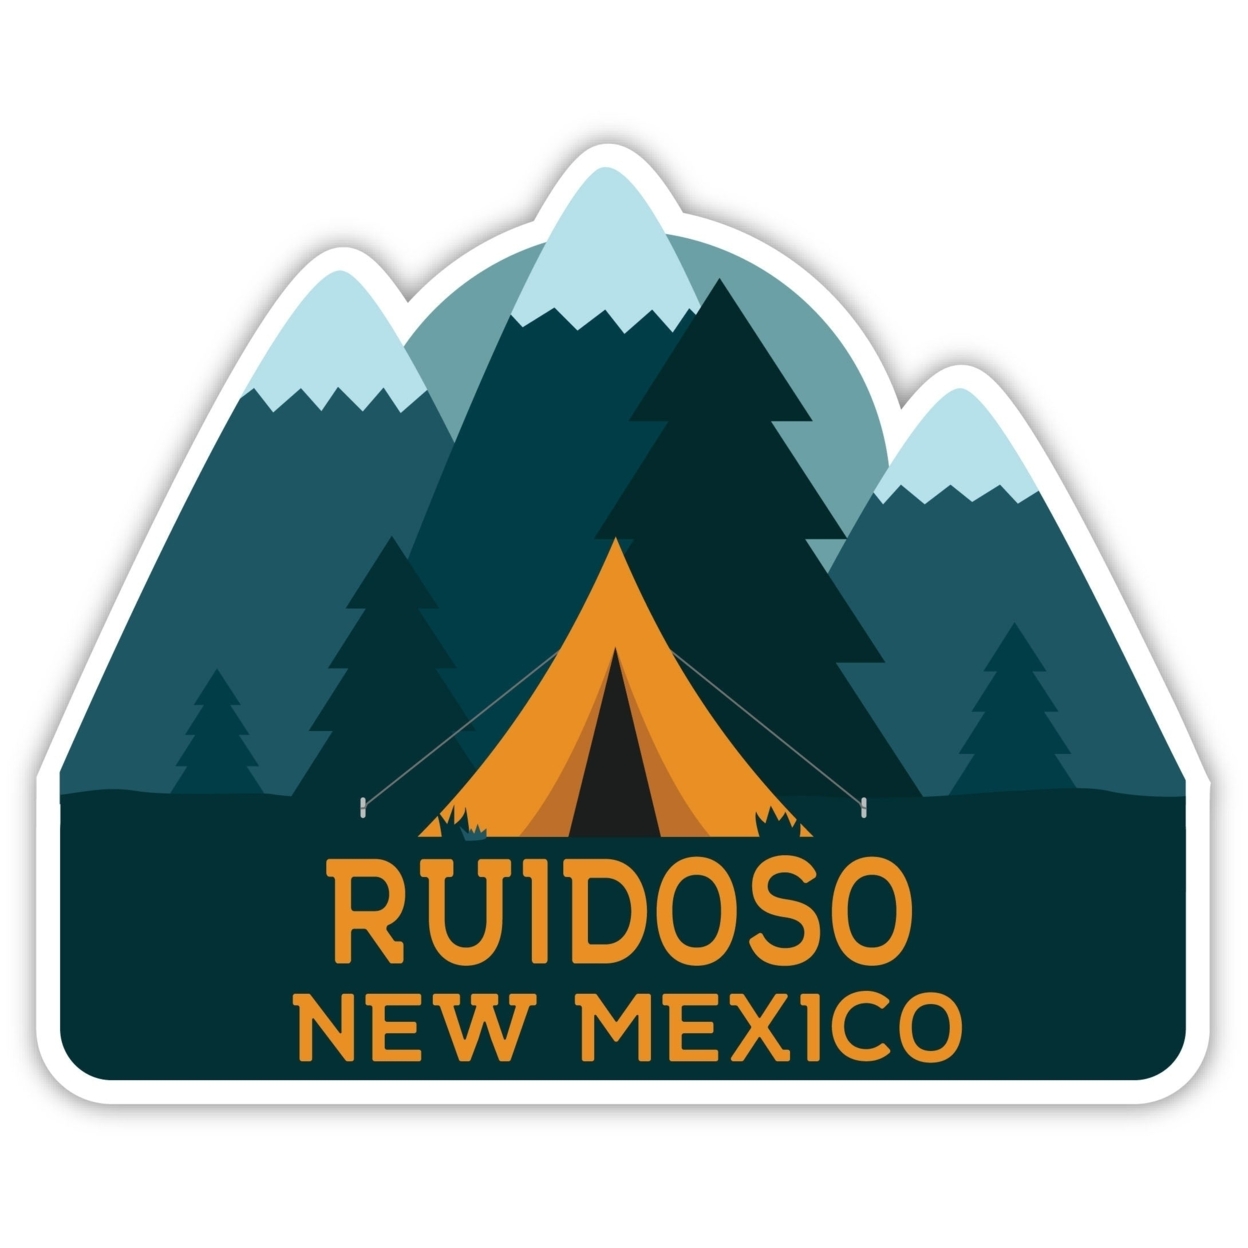 Ruidoso New Mexico Souvenir Decorative Stickers (Choose Theme And Size) - Single Unit, 4-Inch, Adventures Awaits